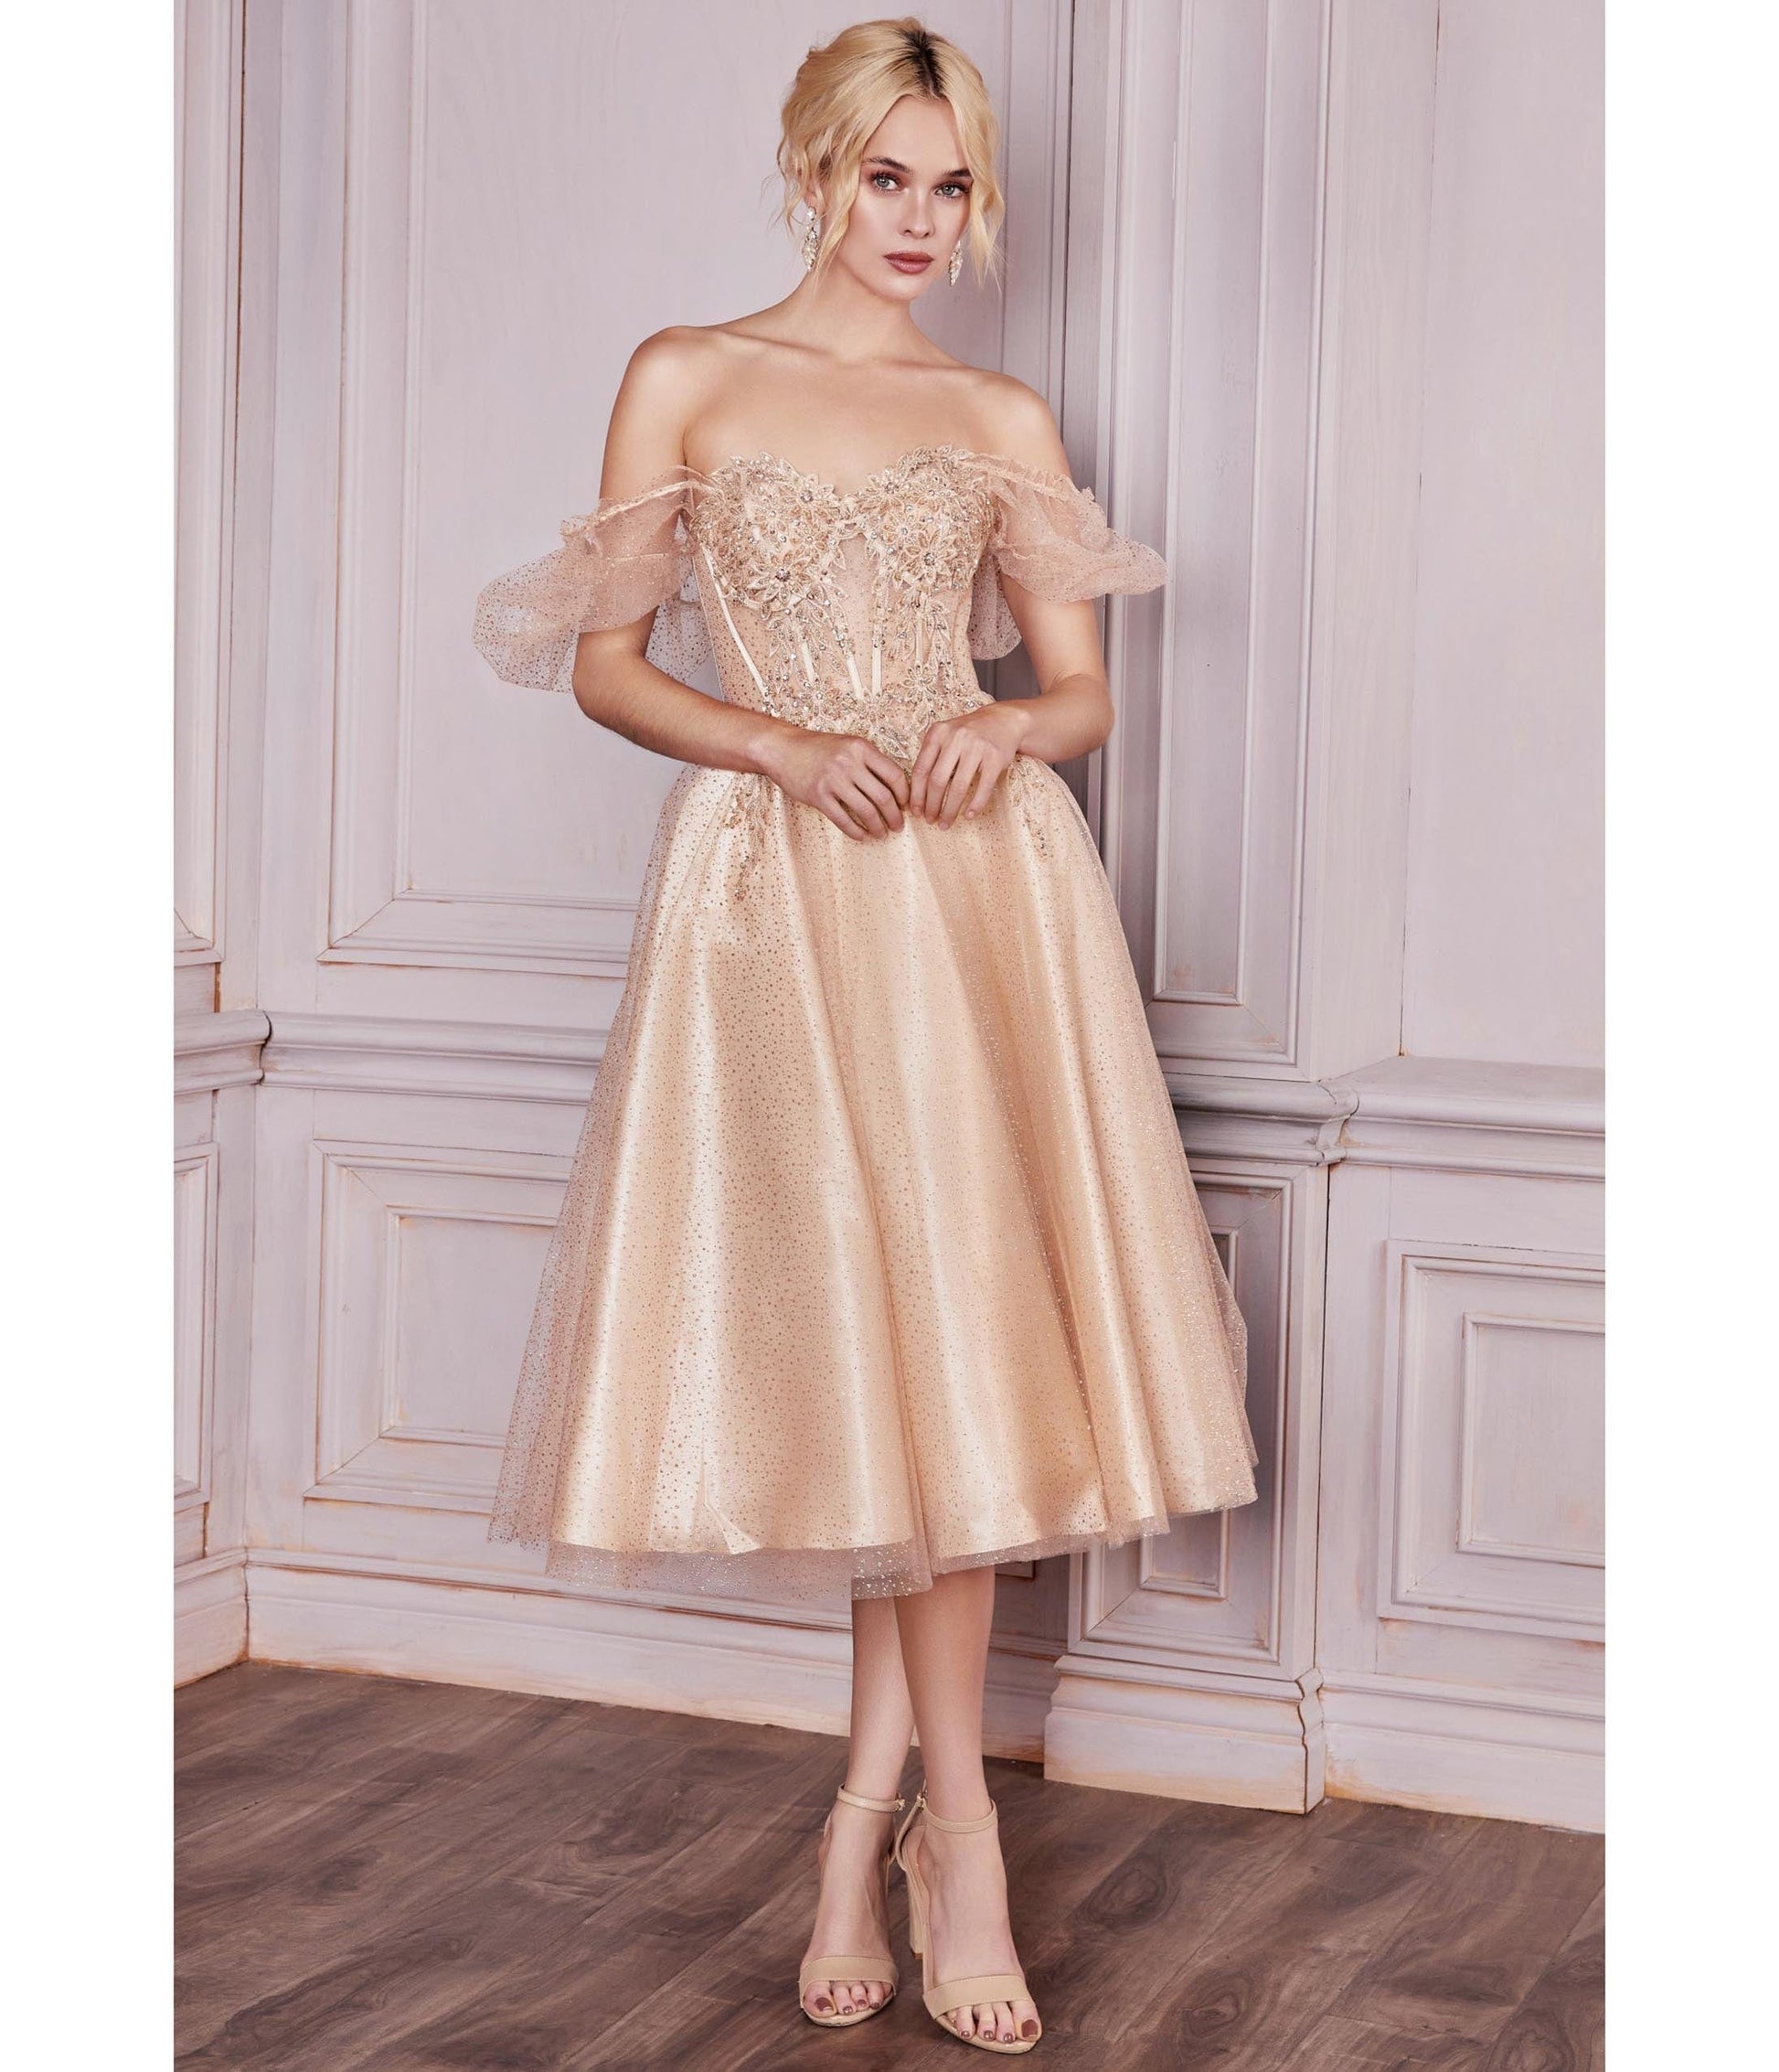 Champagne Glitter Floral Swing Prom Dress